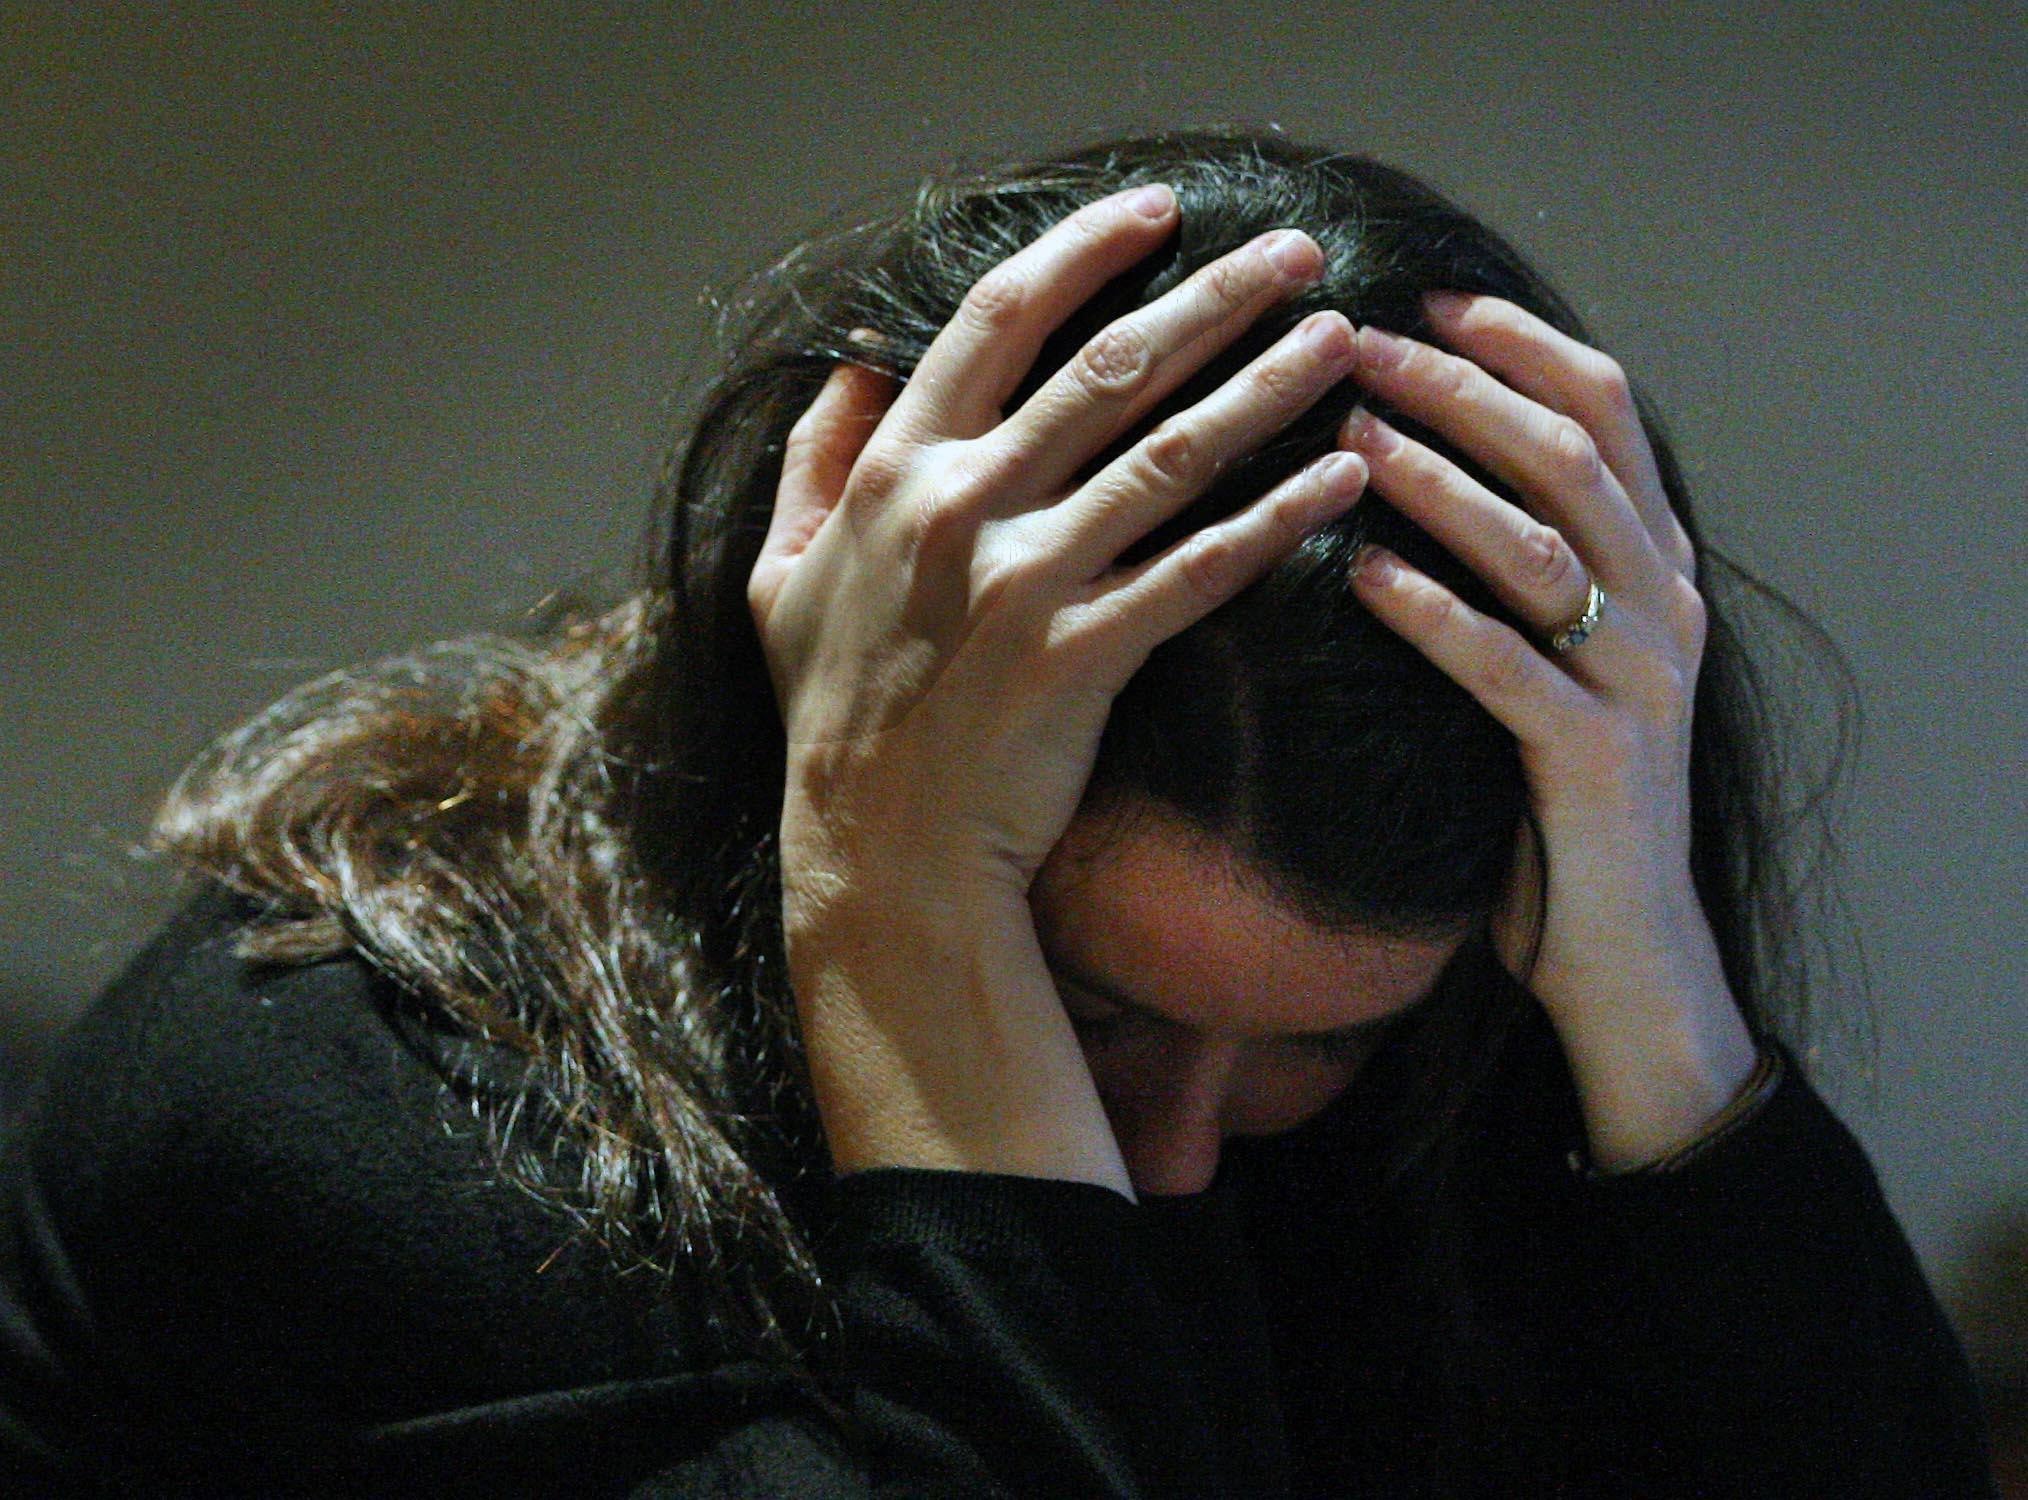 Symptoms of depression and anxiety increased sharply over the Christmas period, a survey found (David Cheskin/PA)